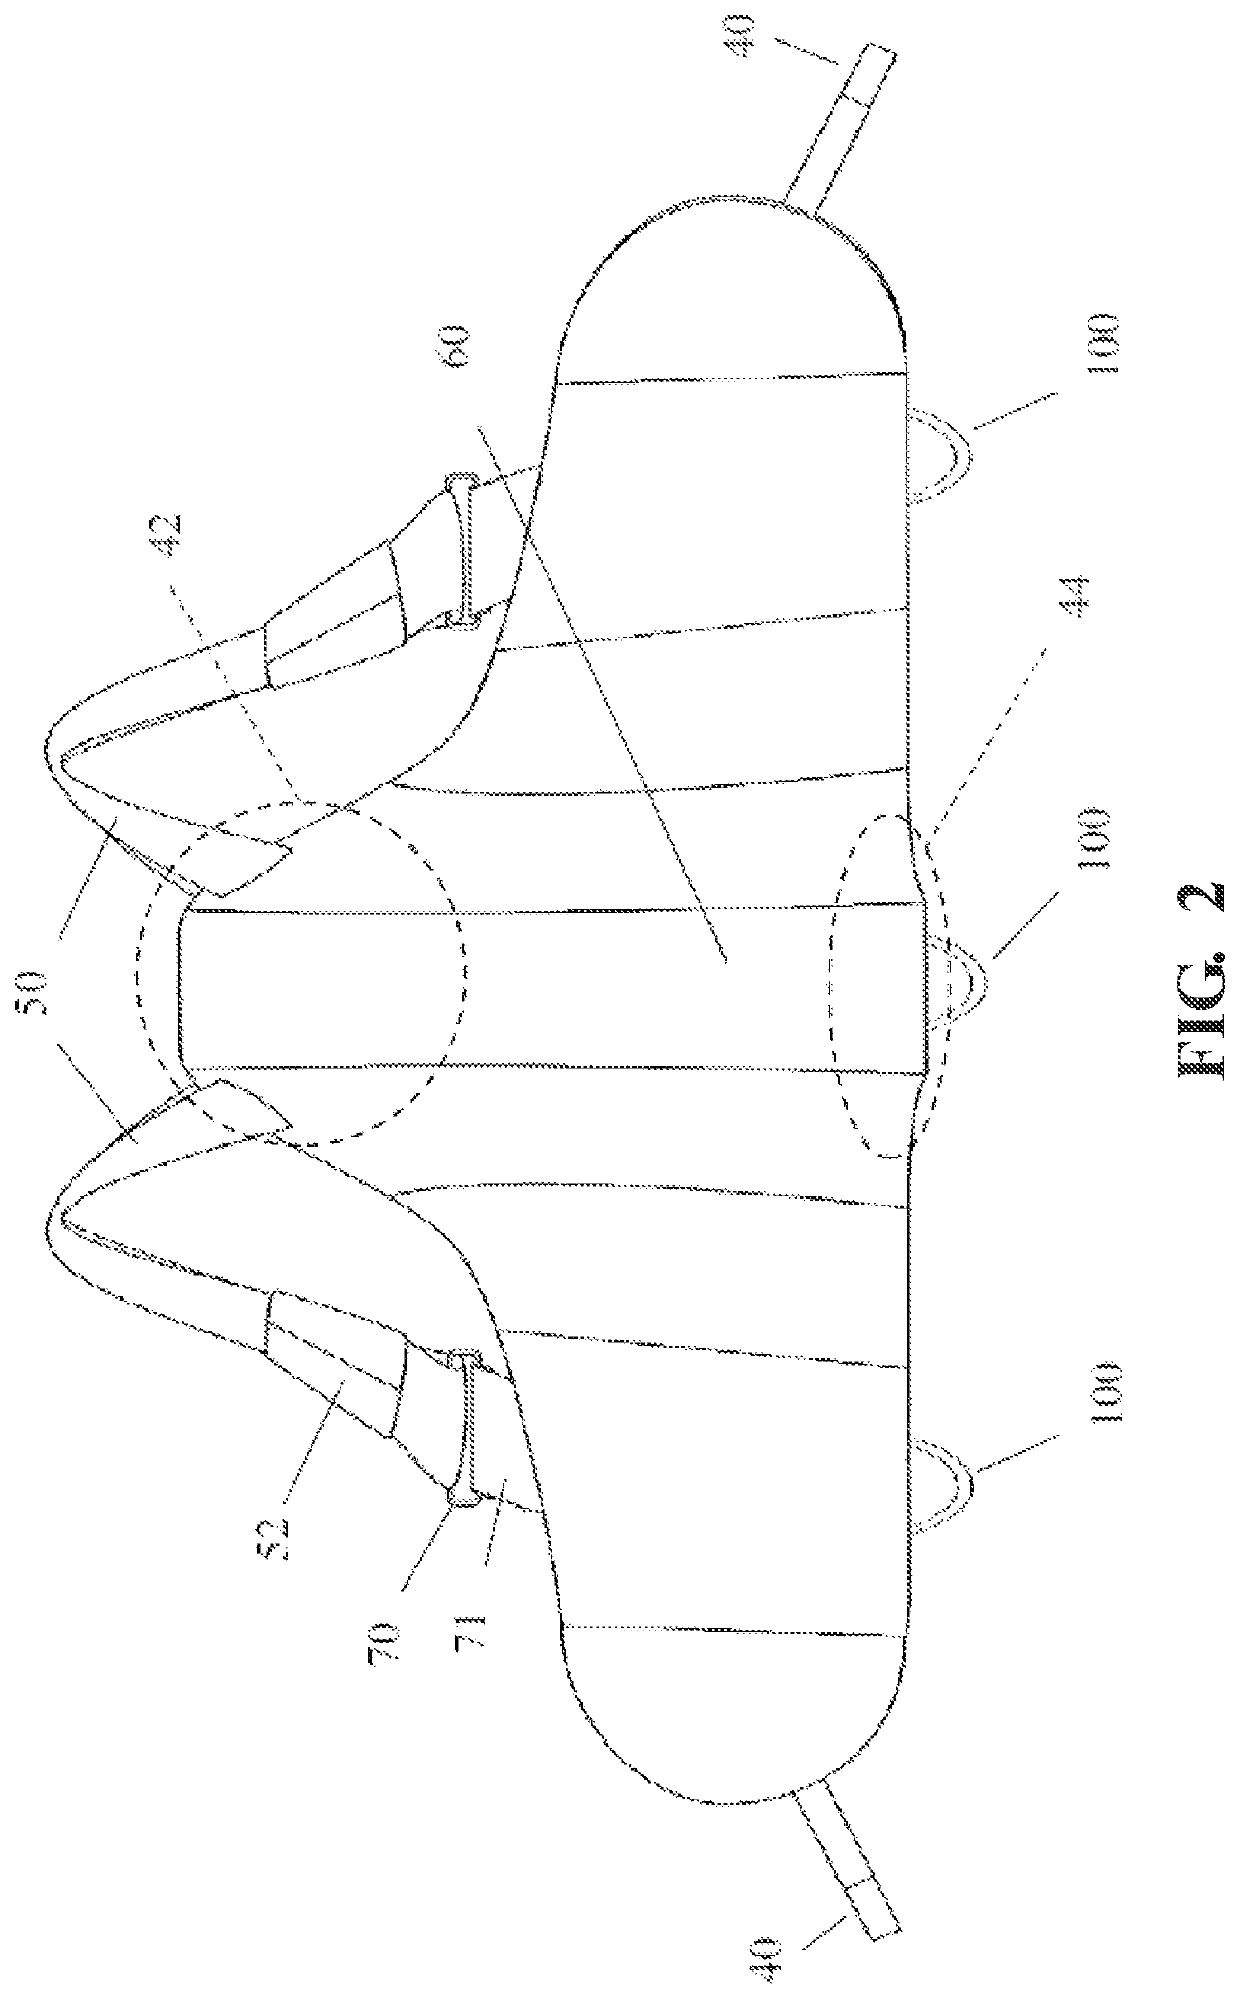 Instrumented physiotherapeutic, ambulatory, and mobility vest to monitor and provide feedback to patients and caregivers